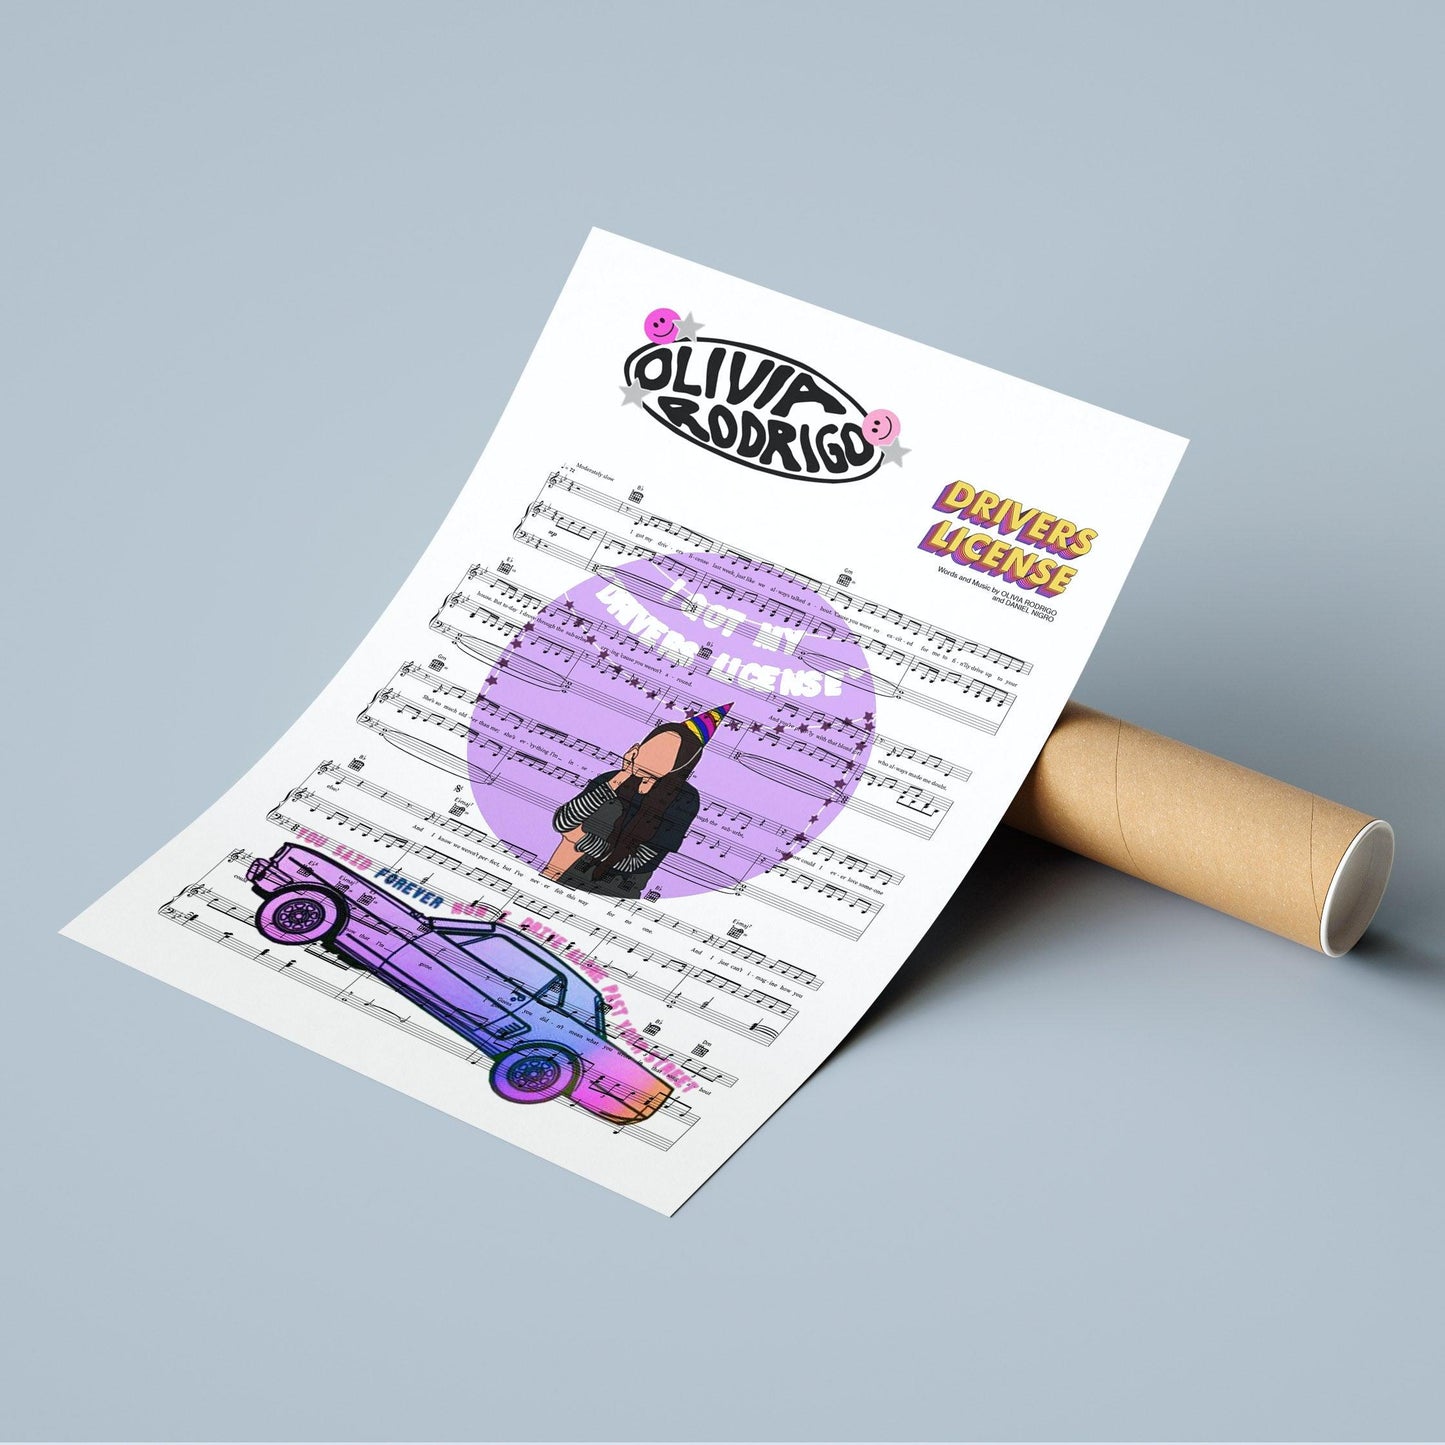 Olivia Rodrigo Driver Licence Song Music Print | Song Music Sheet Notes Print  Everyone has a favorite song and now you can show the score as printed staff. The personal favorite song sheet print shows the song chosen as the score. 